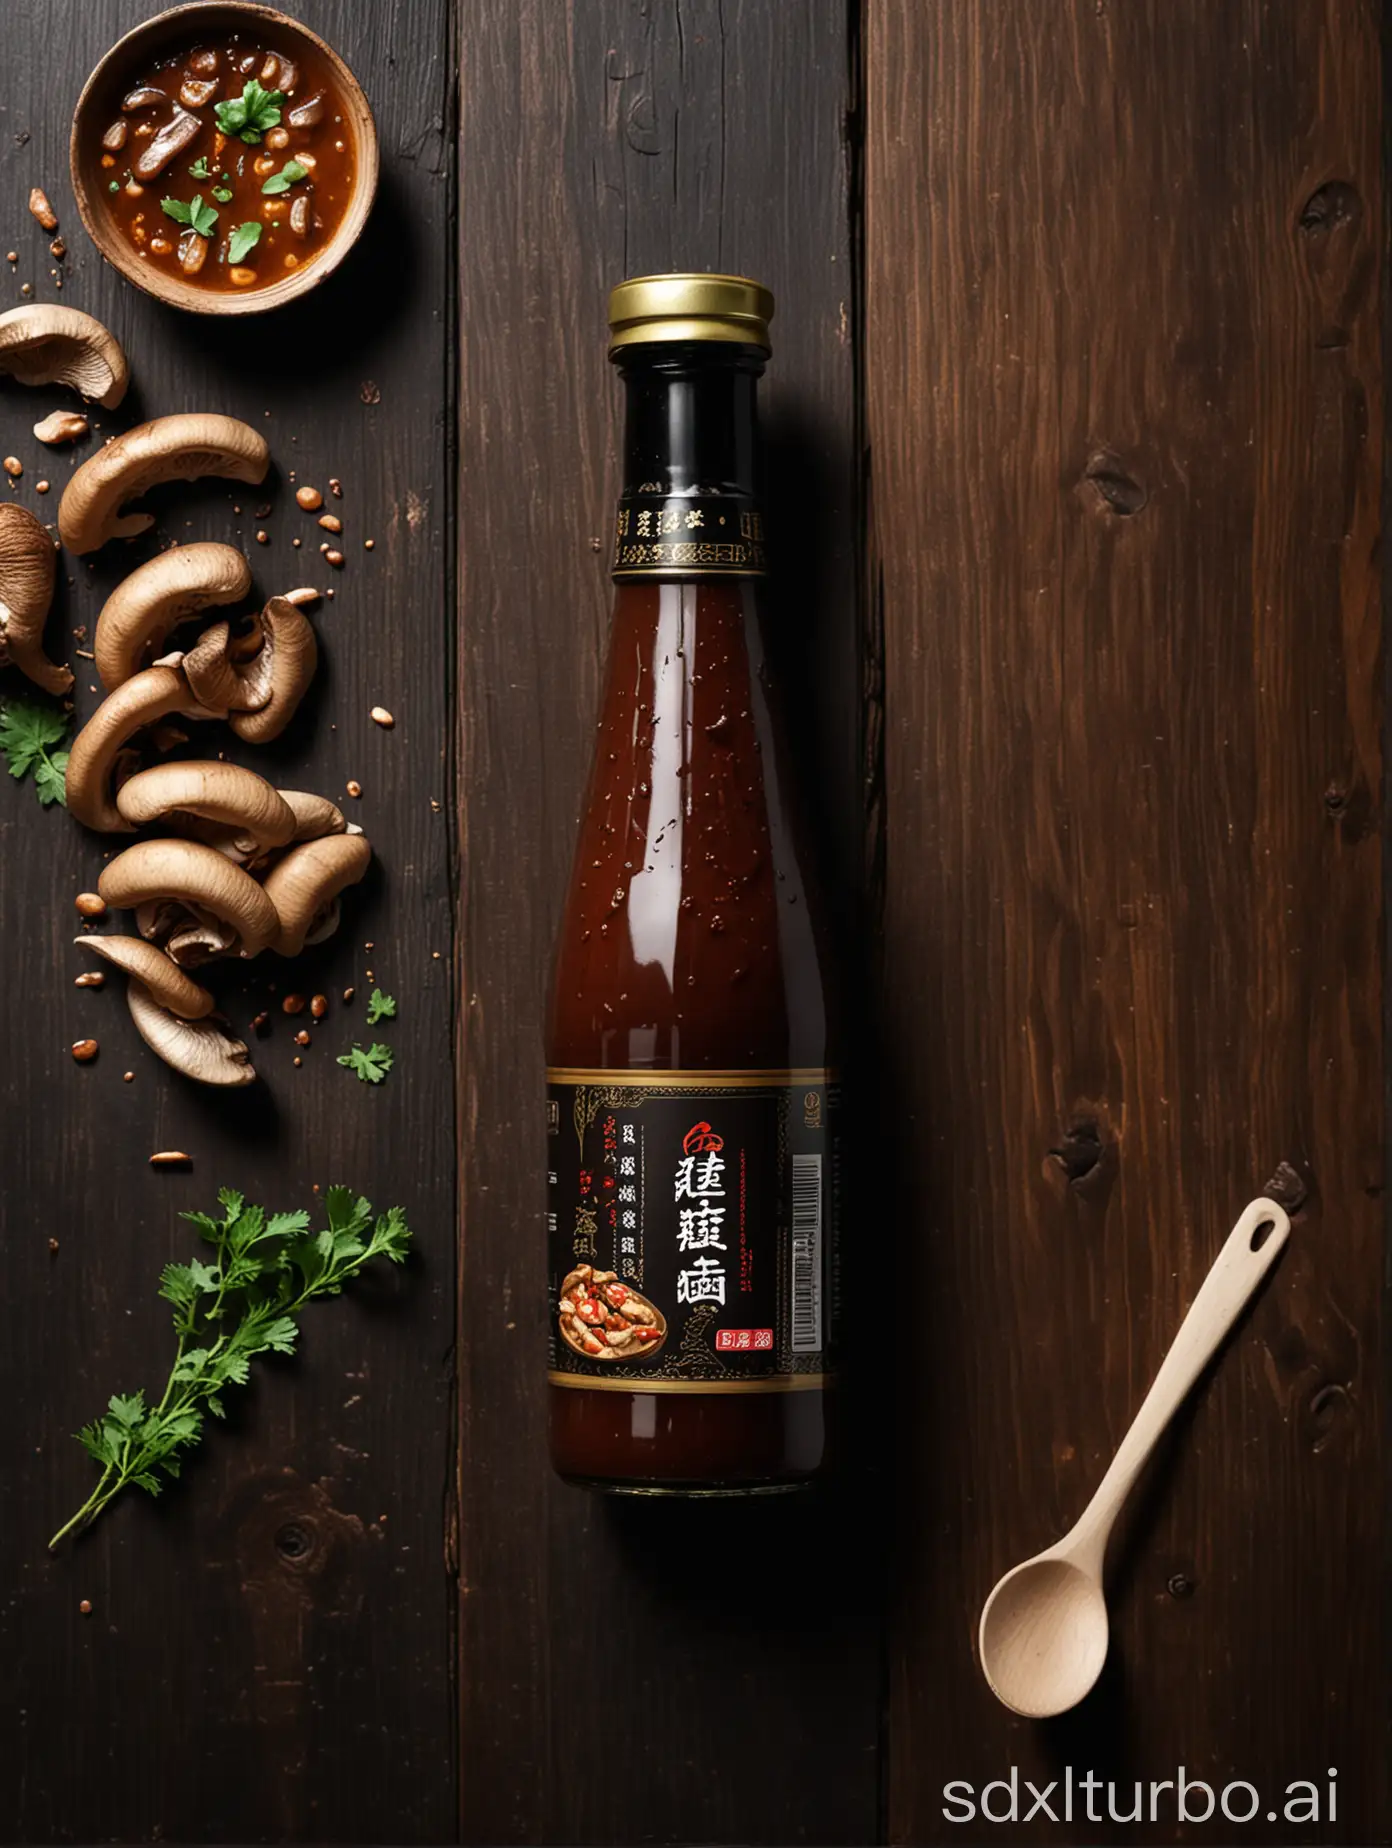 advertising for a bottle of Chinese mushroom sauce on a table made of dark wood. 